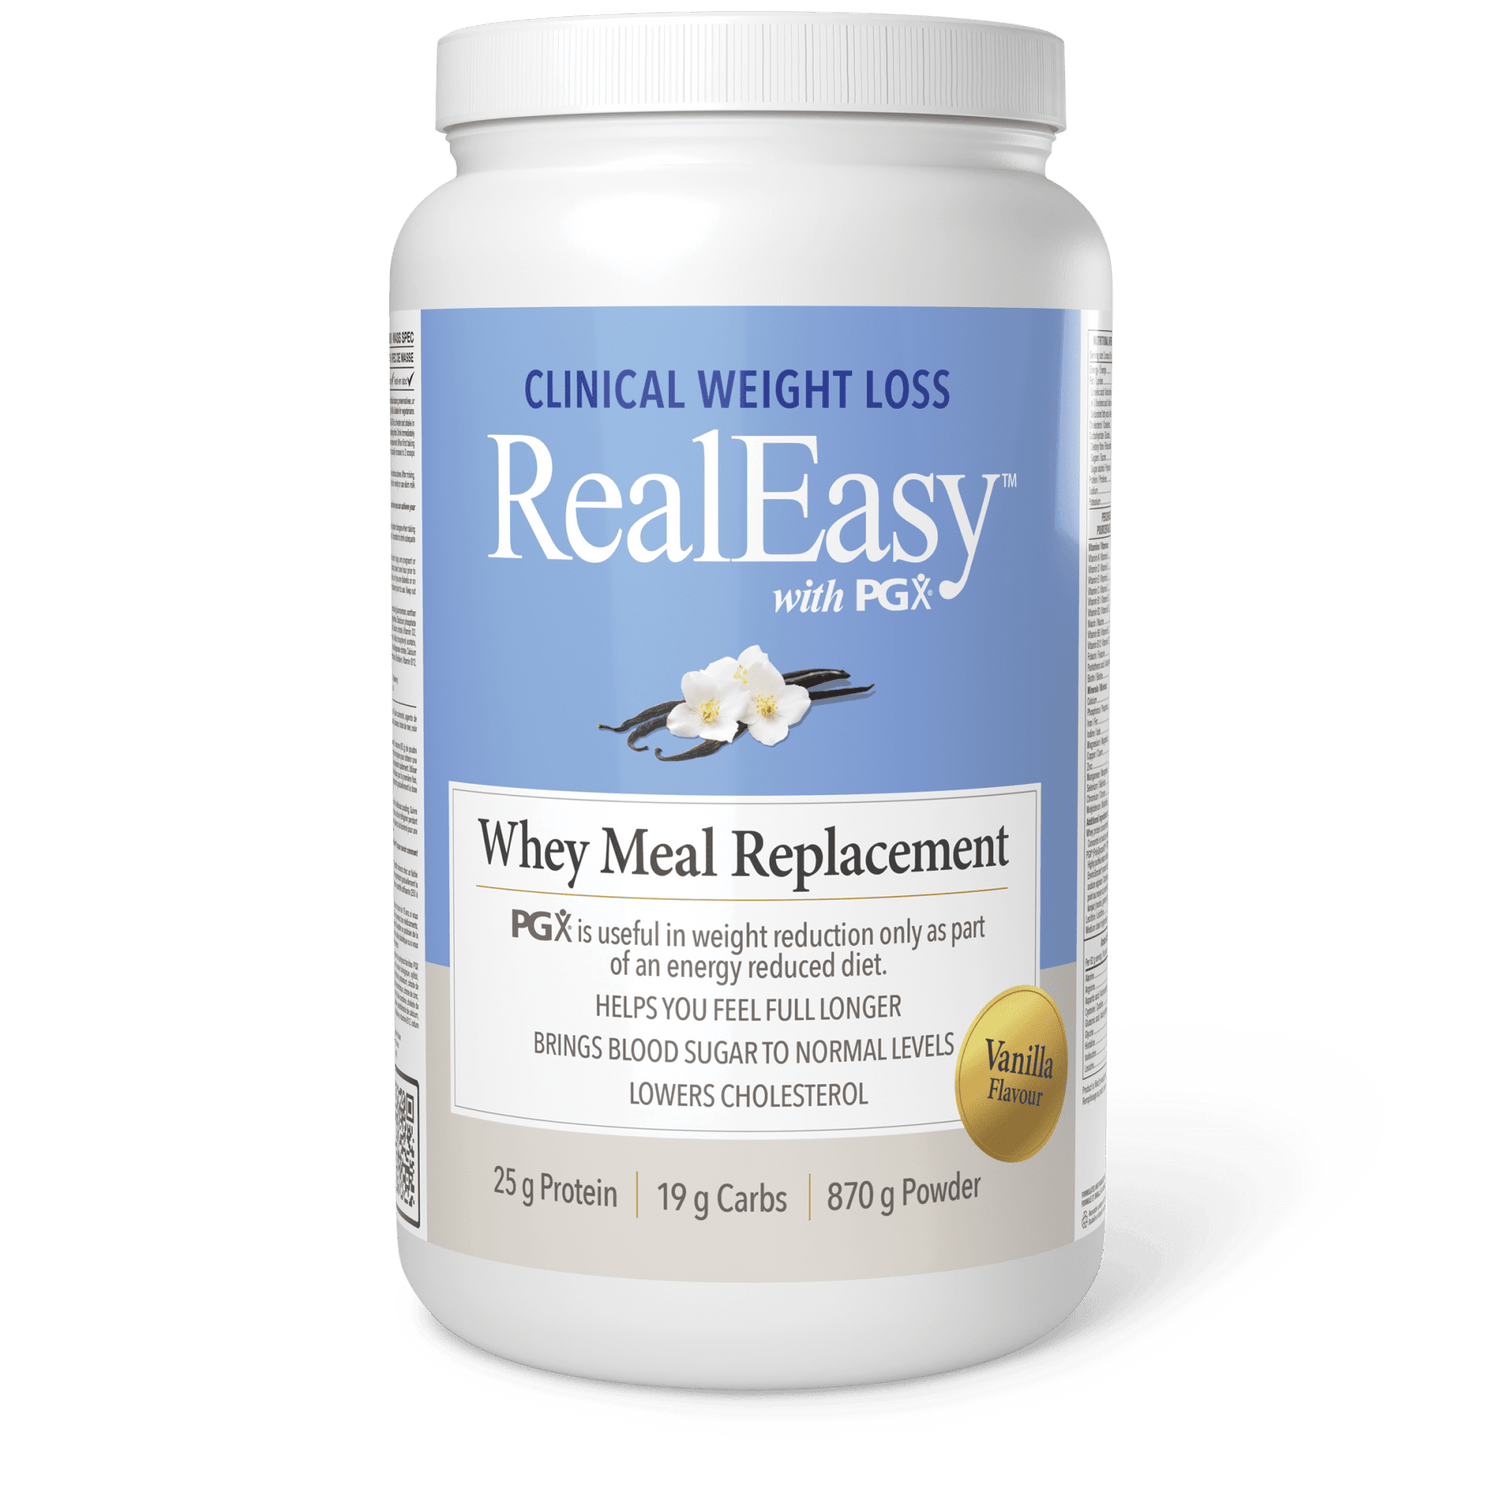 RealEasy with PGX Whey Meal Replacement, Vanilla, Natural Factors|v|image|3608